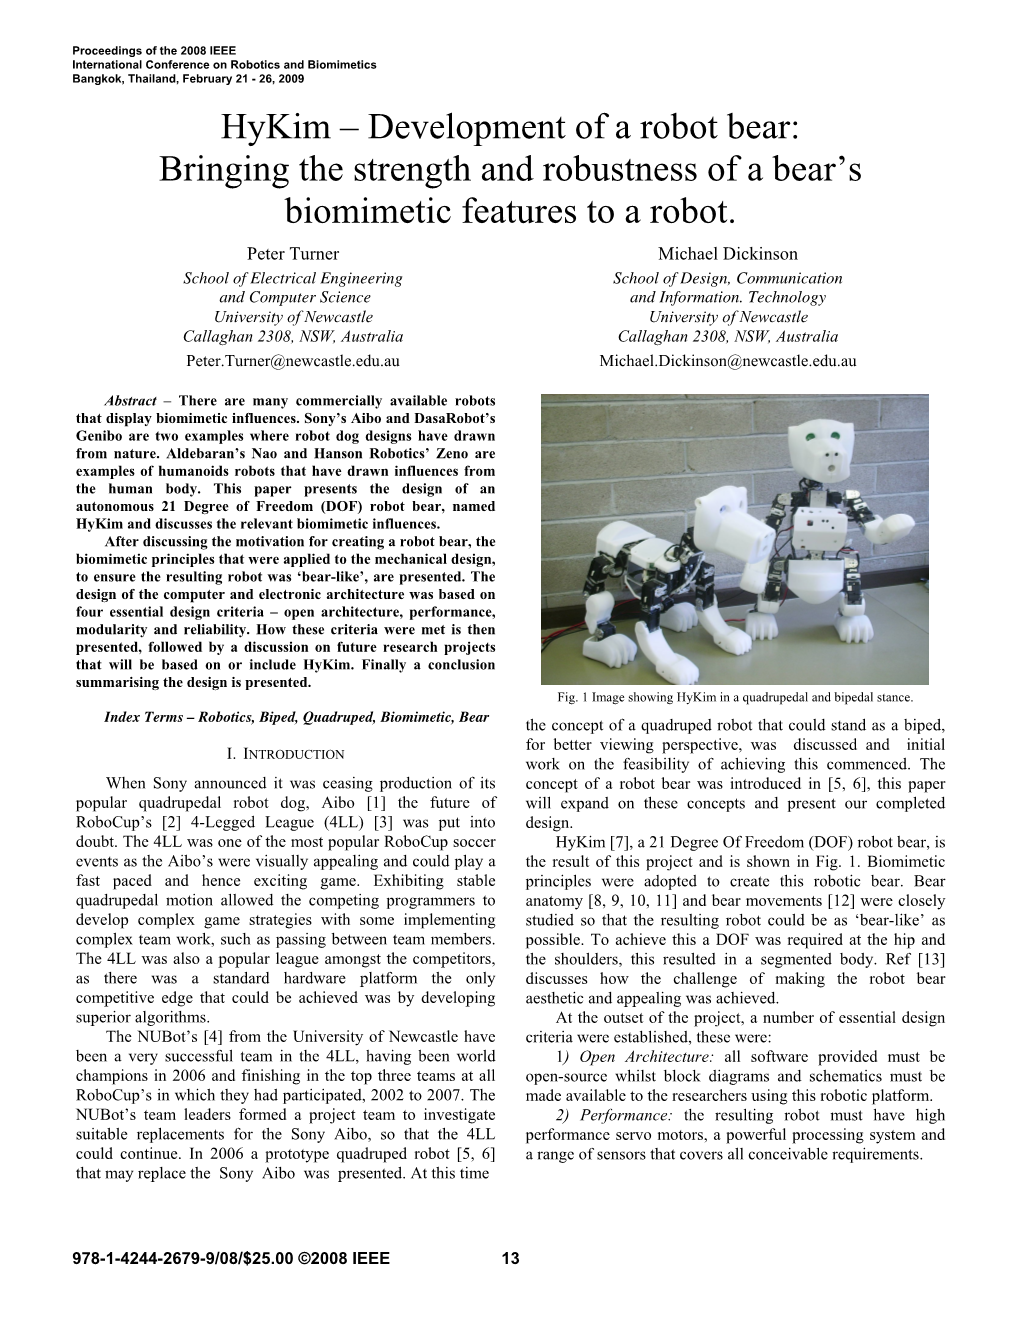 Development of a Robot Bear: Bringing the Strength and Robustness of a Bear’S Biomimetic Features to a Robot